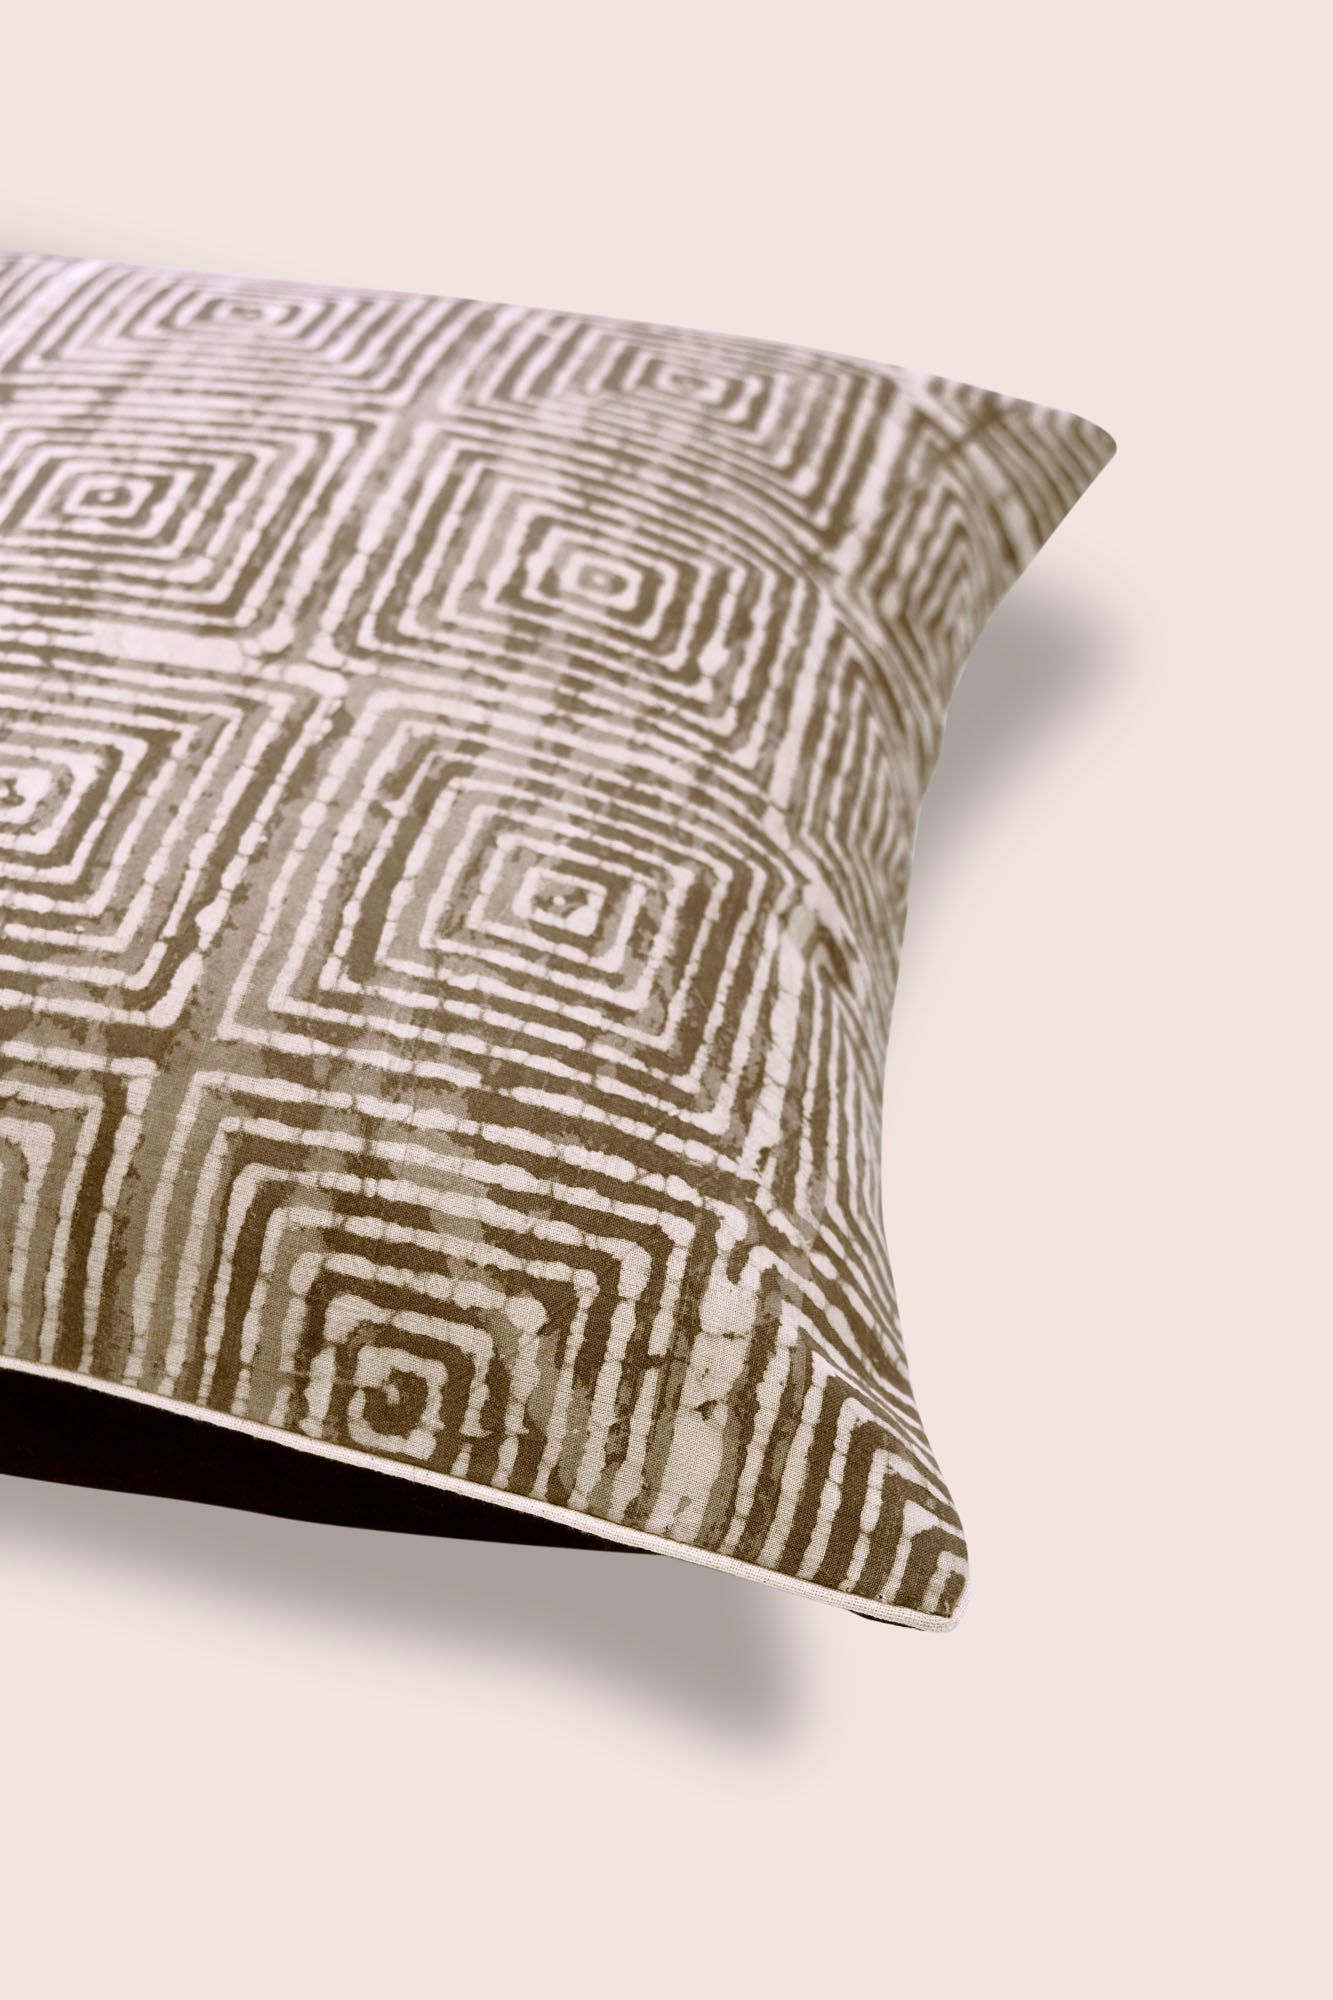 The Spiral Cushion Cover